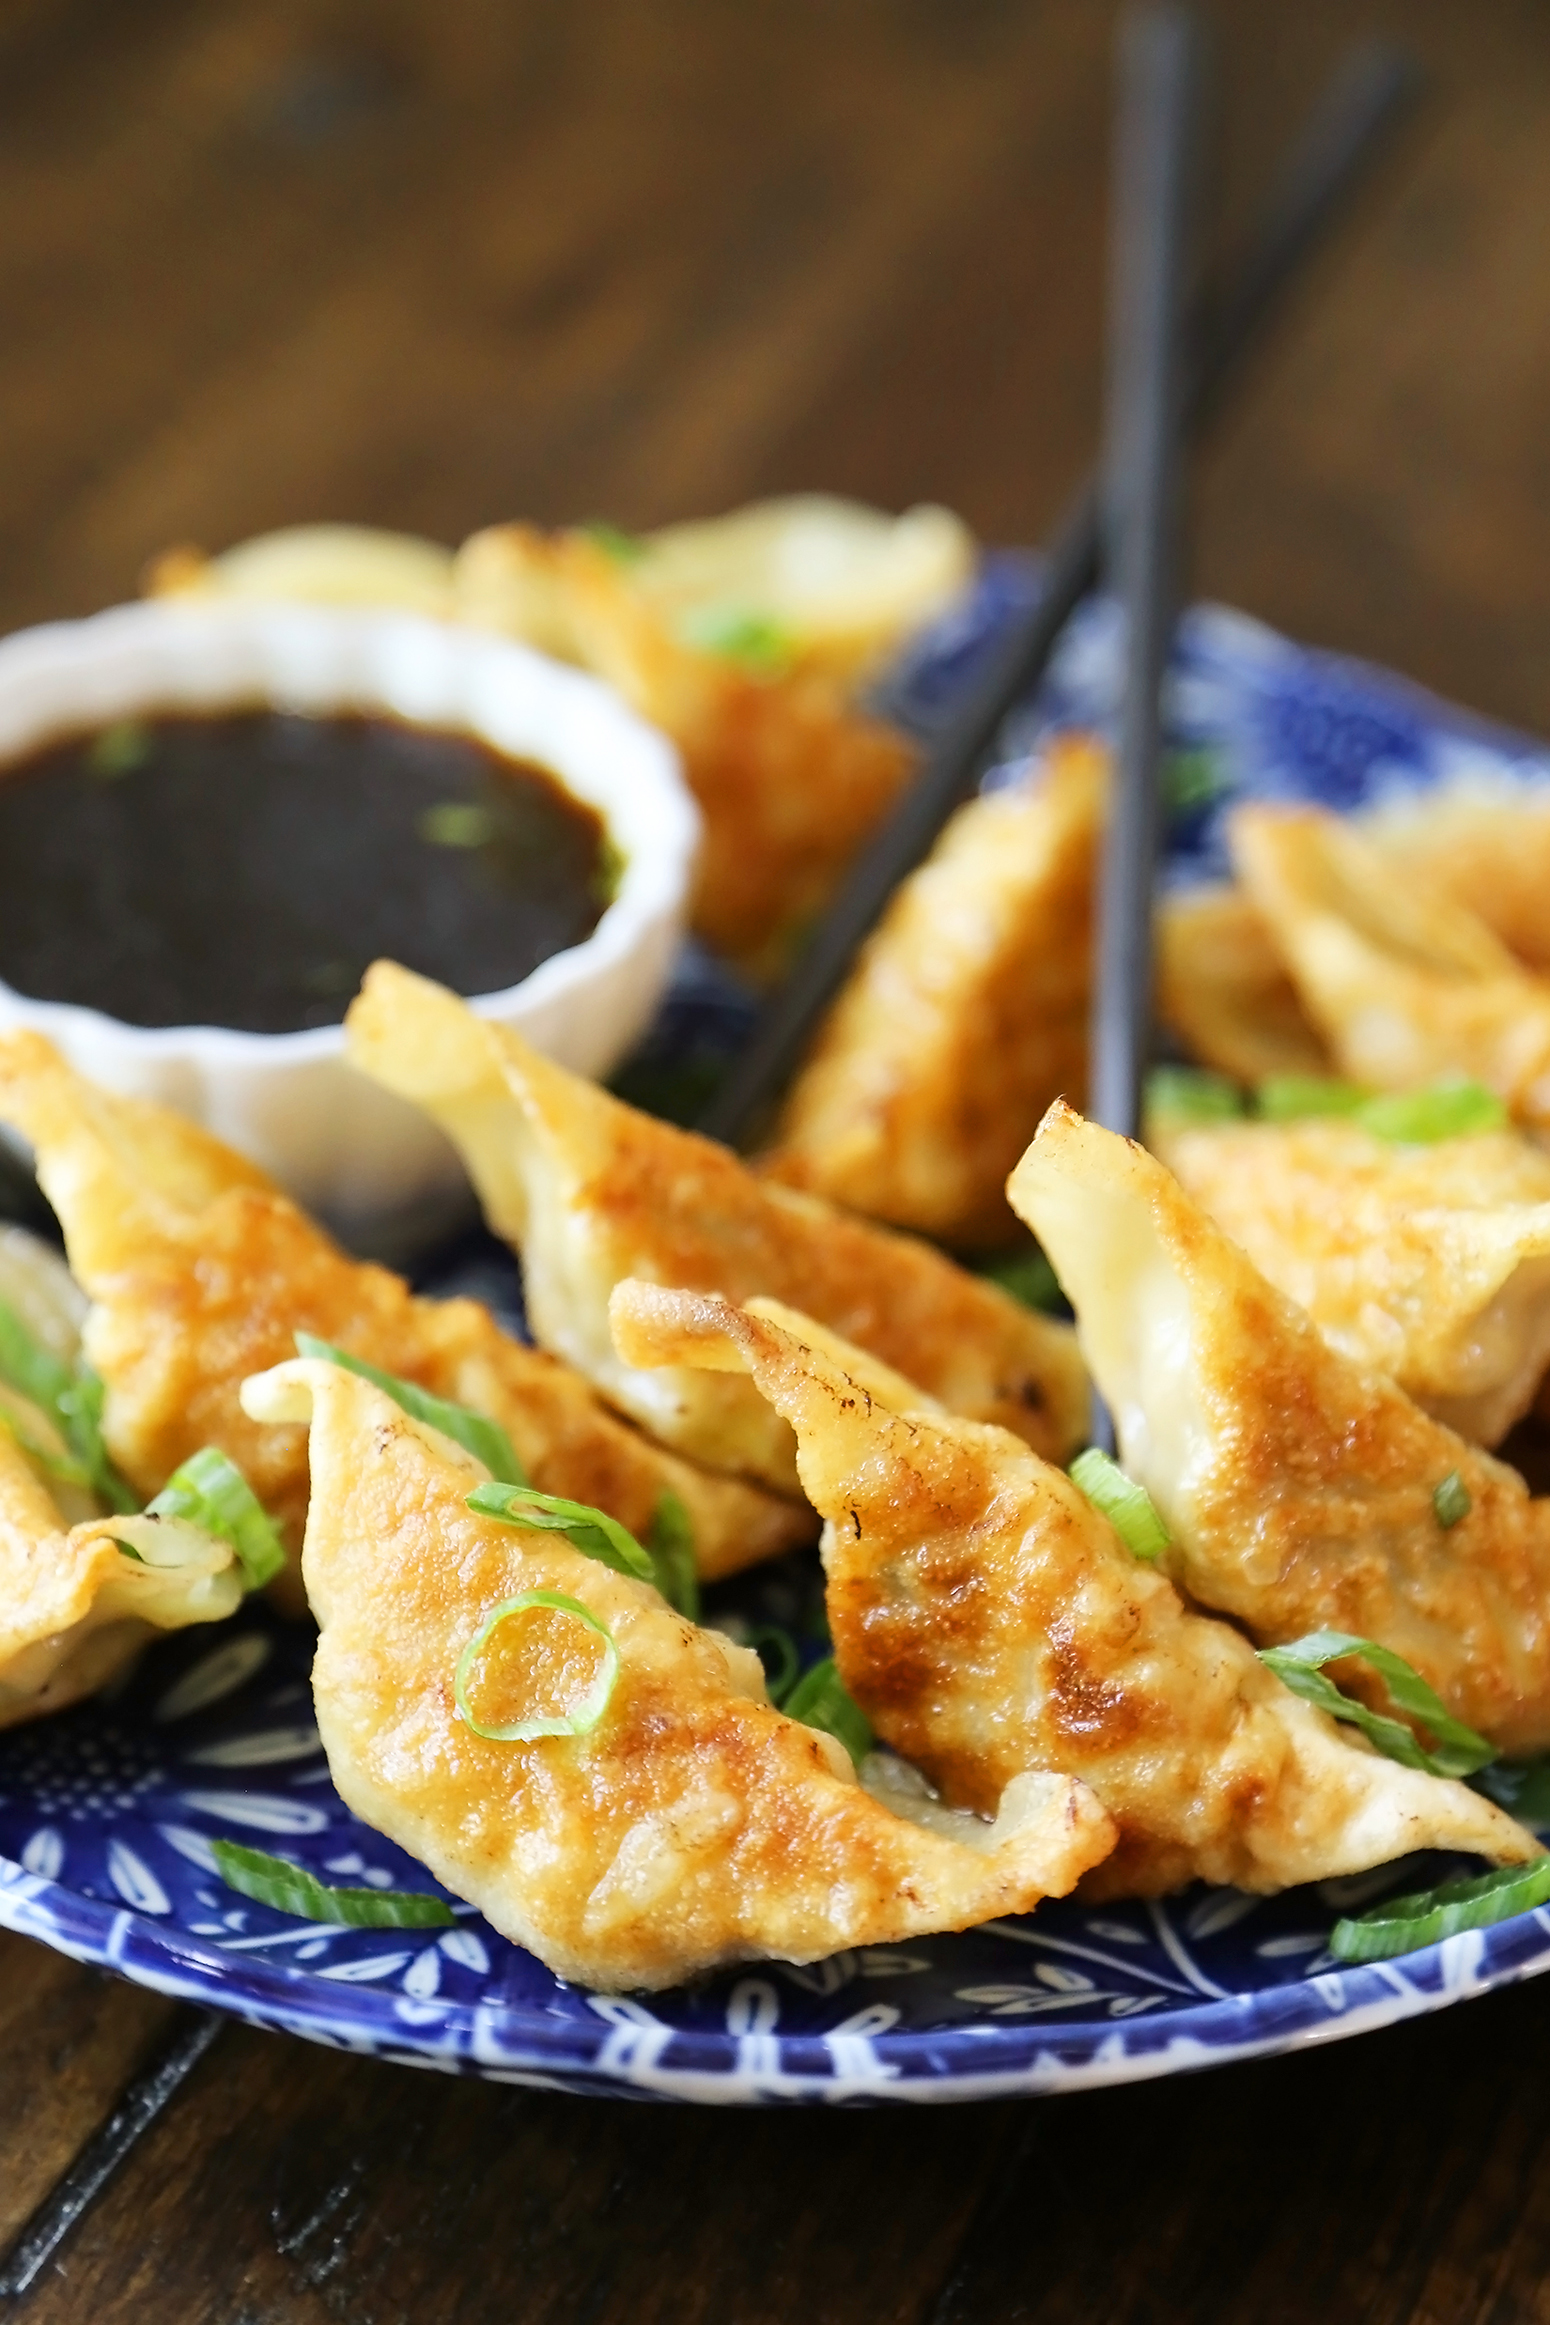 Easy Asian Dumplings with Soy-Ginger Dipping Sauce - Crispy, tender steamed potstickers, made easily in one skillet! thecomfortofcooking.com